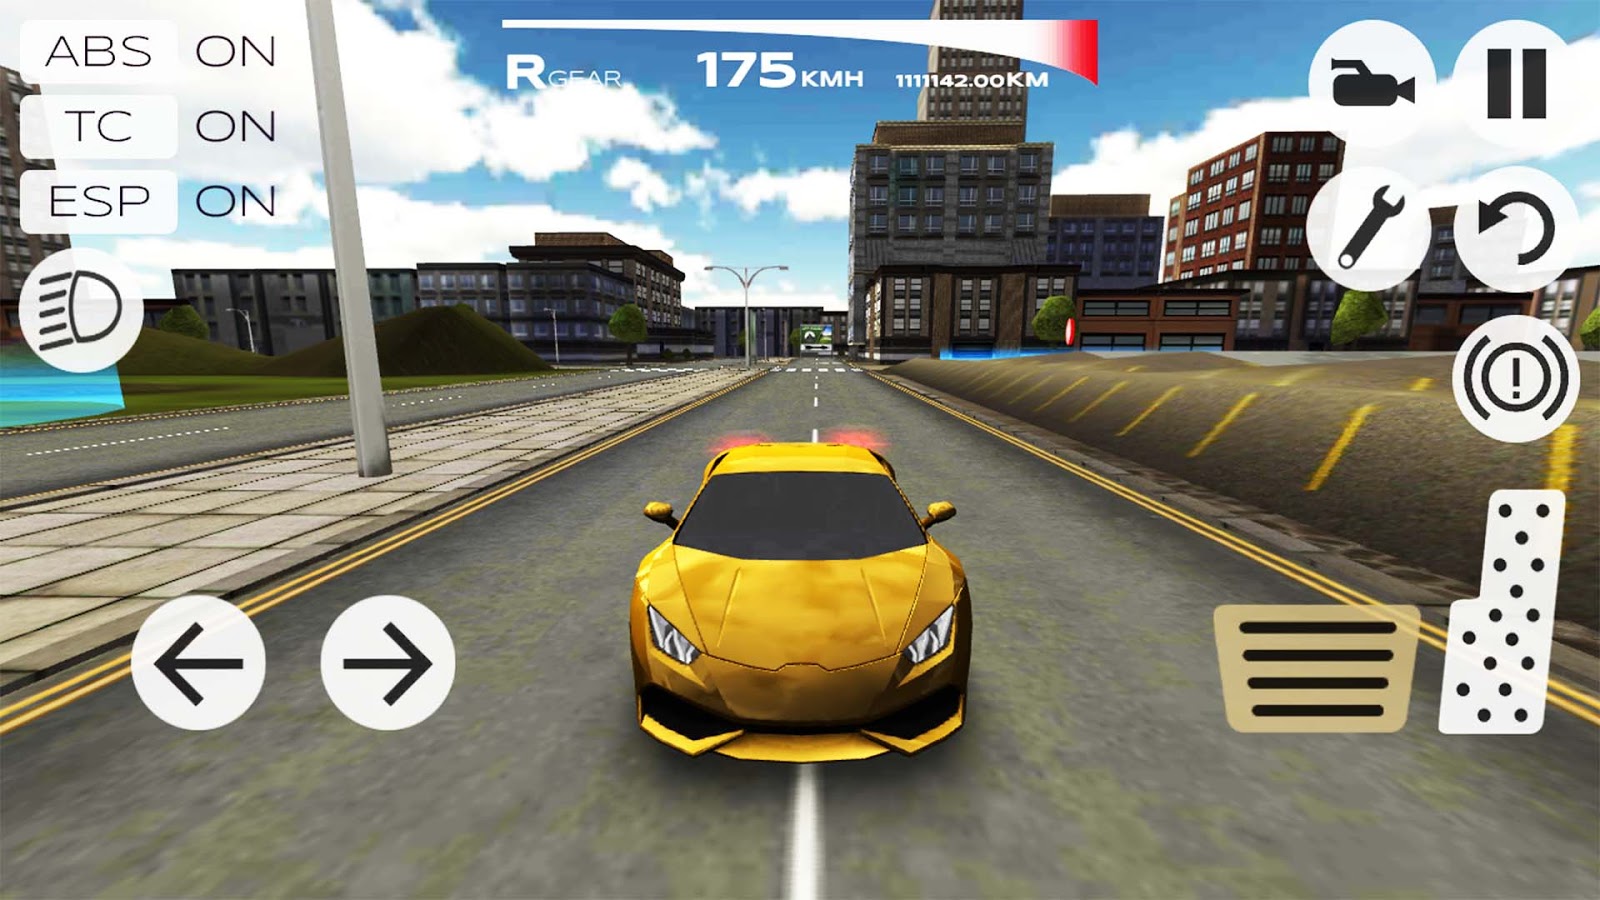 Extreme Car Driving Simulator 4.18.04 Free Download Apk + Mod for